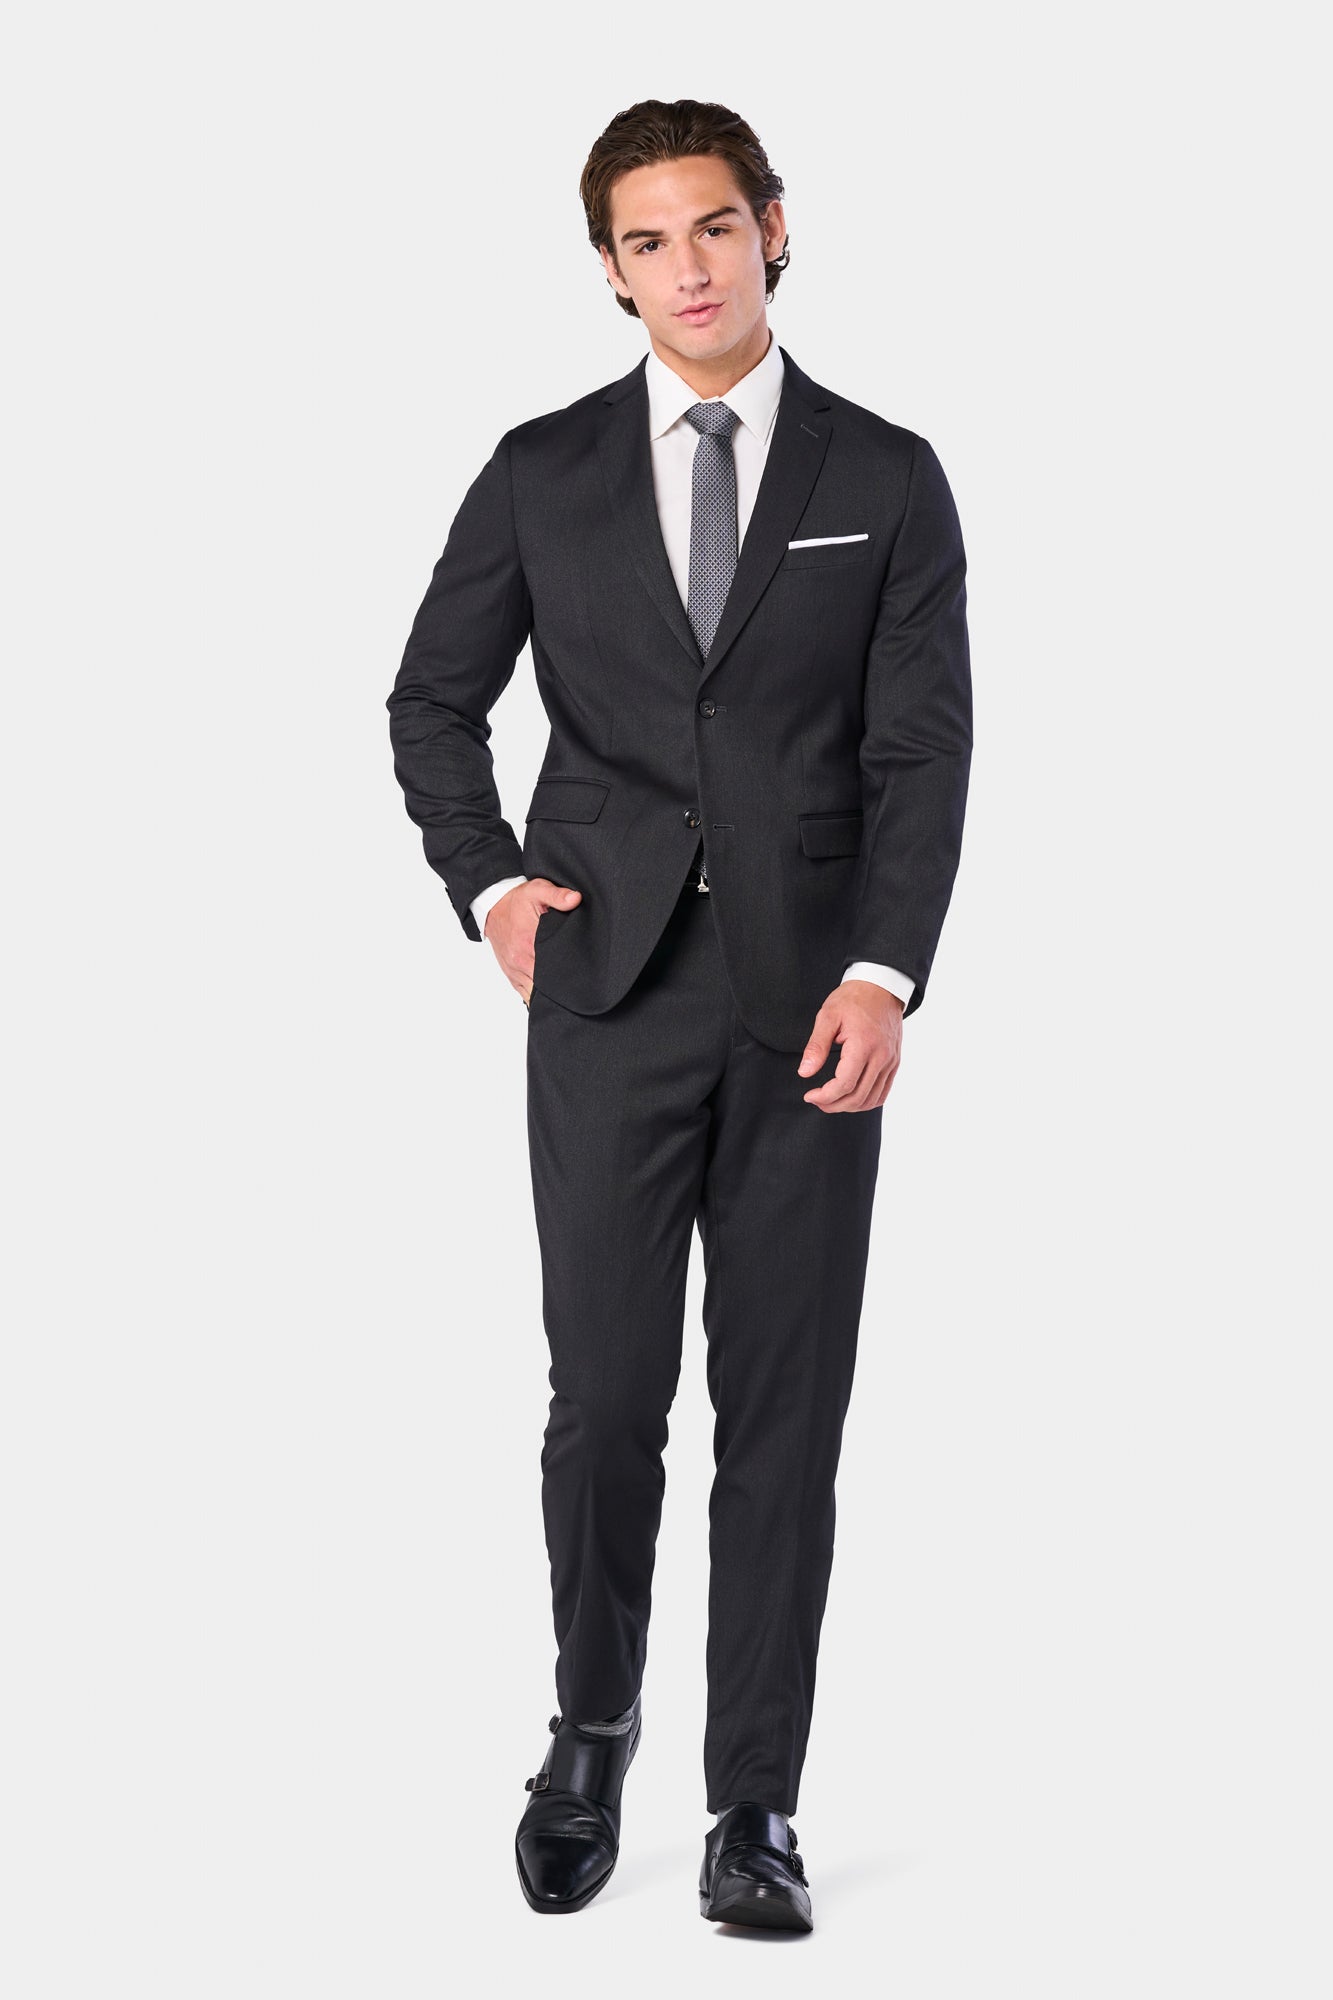 40 Best Charcoal Grey Suit Ideas Paired With Brown Shoes | Grey suit brown  shoes, Mens fashion suits casual, Charcoal gray suit